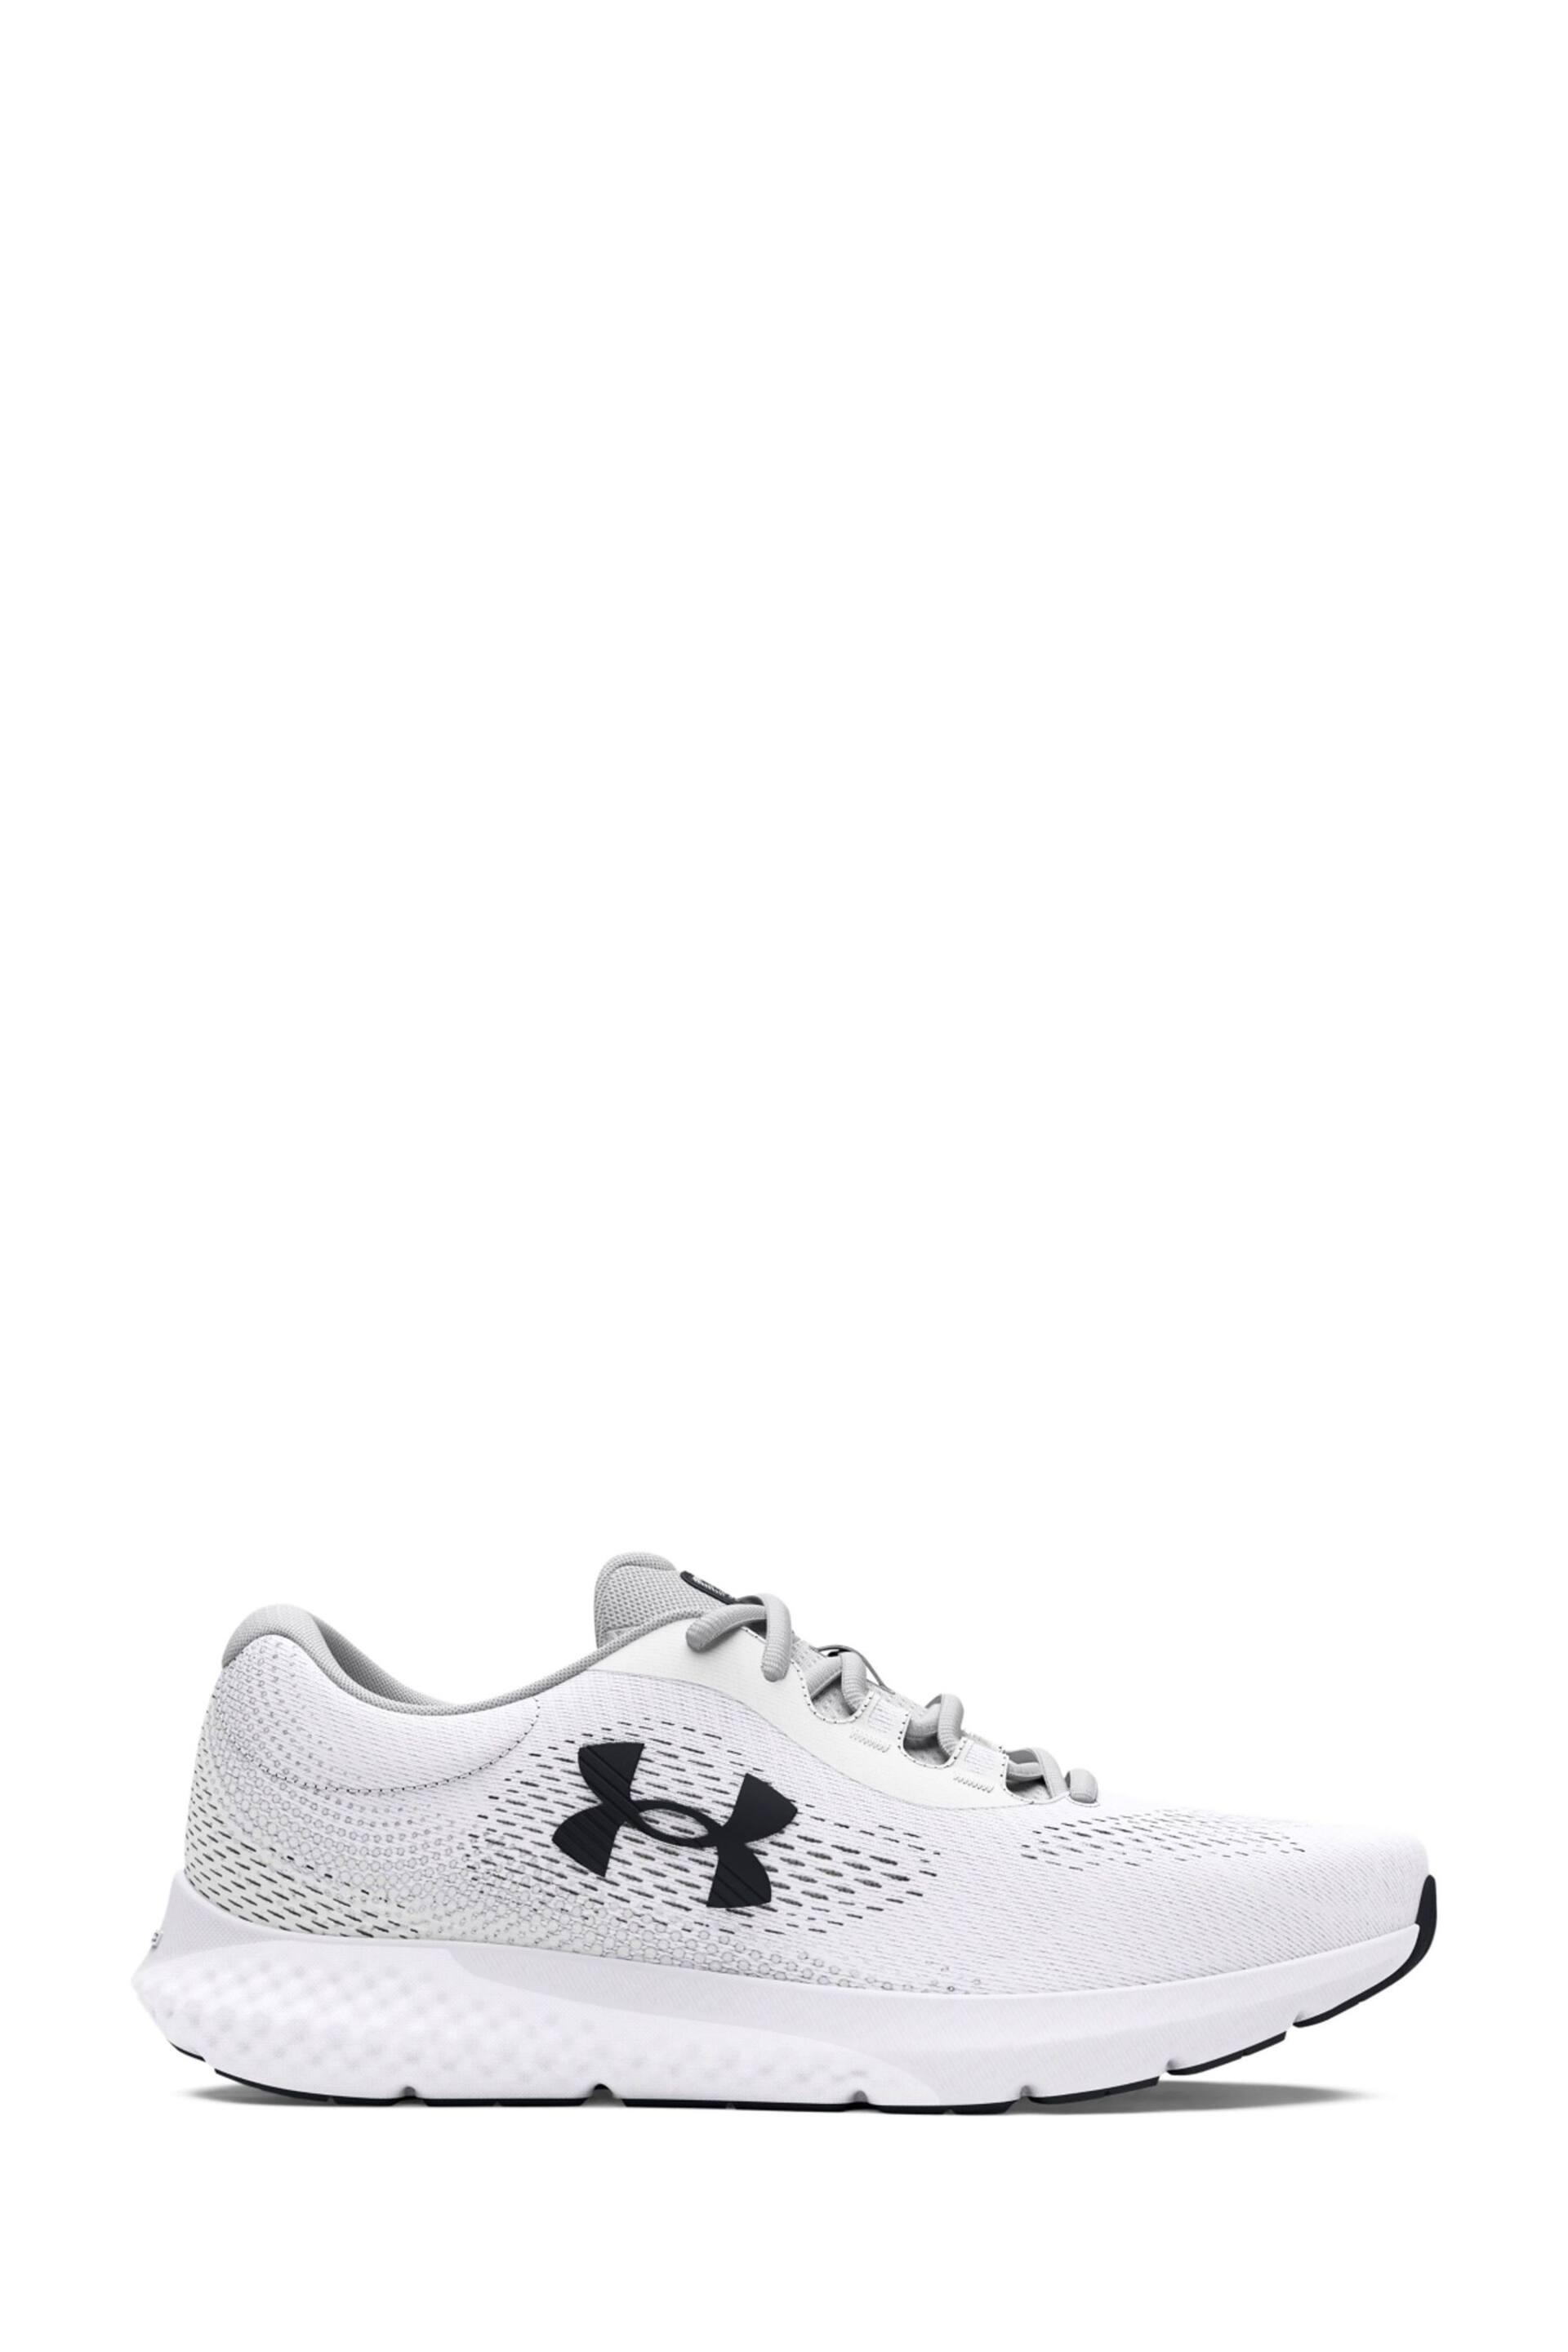 Under Armour Navajo White Under Armour Charged Rogue 4 Trainers - Image 1 of 7